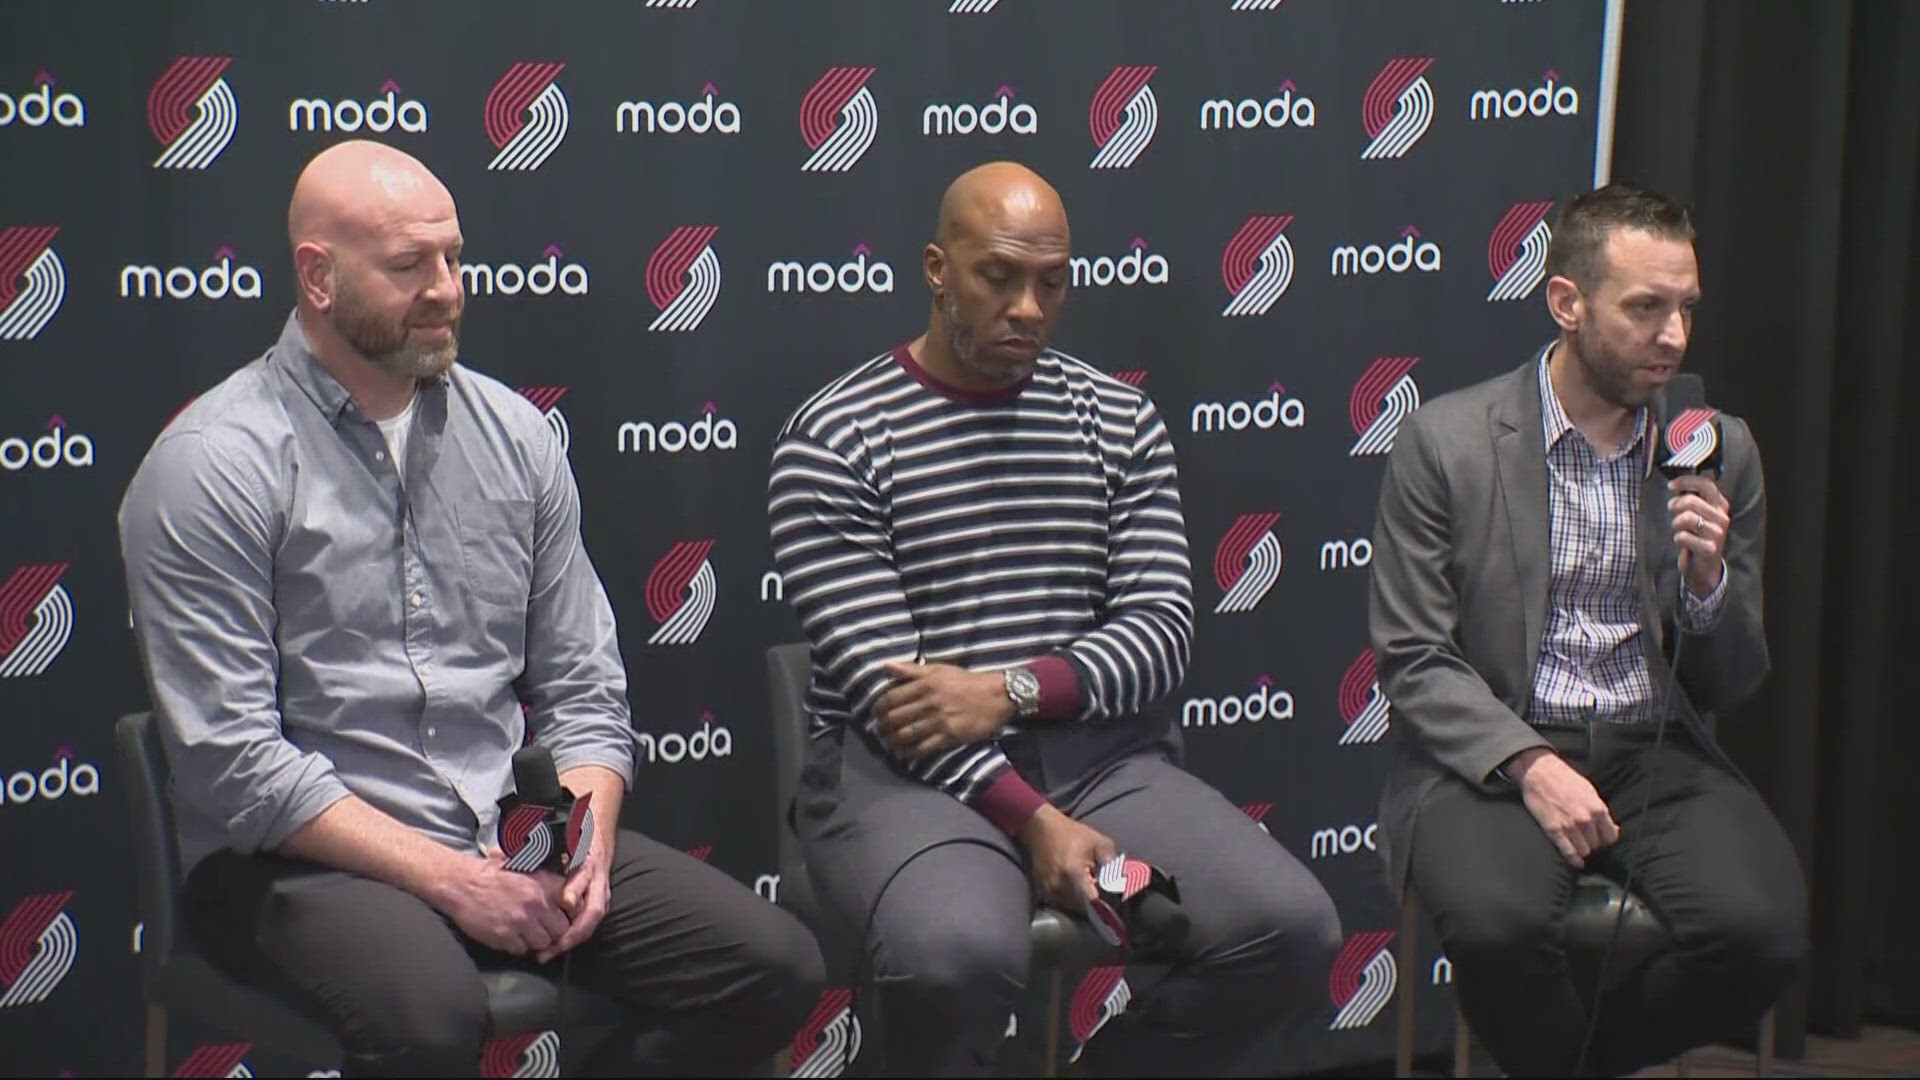 The Portland Trail Blazers have a different, confident vibe early